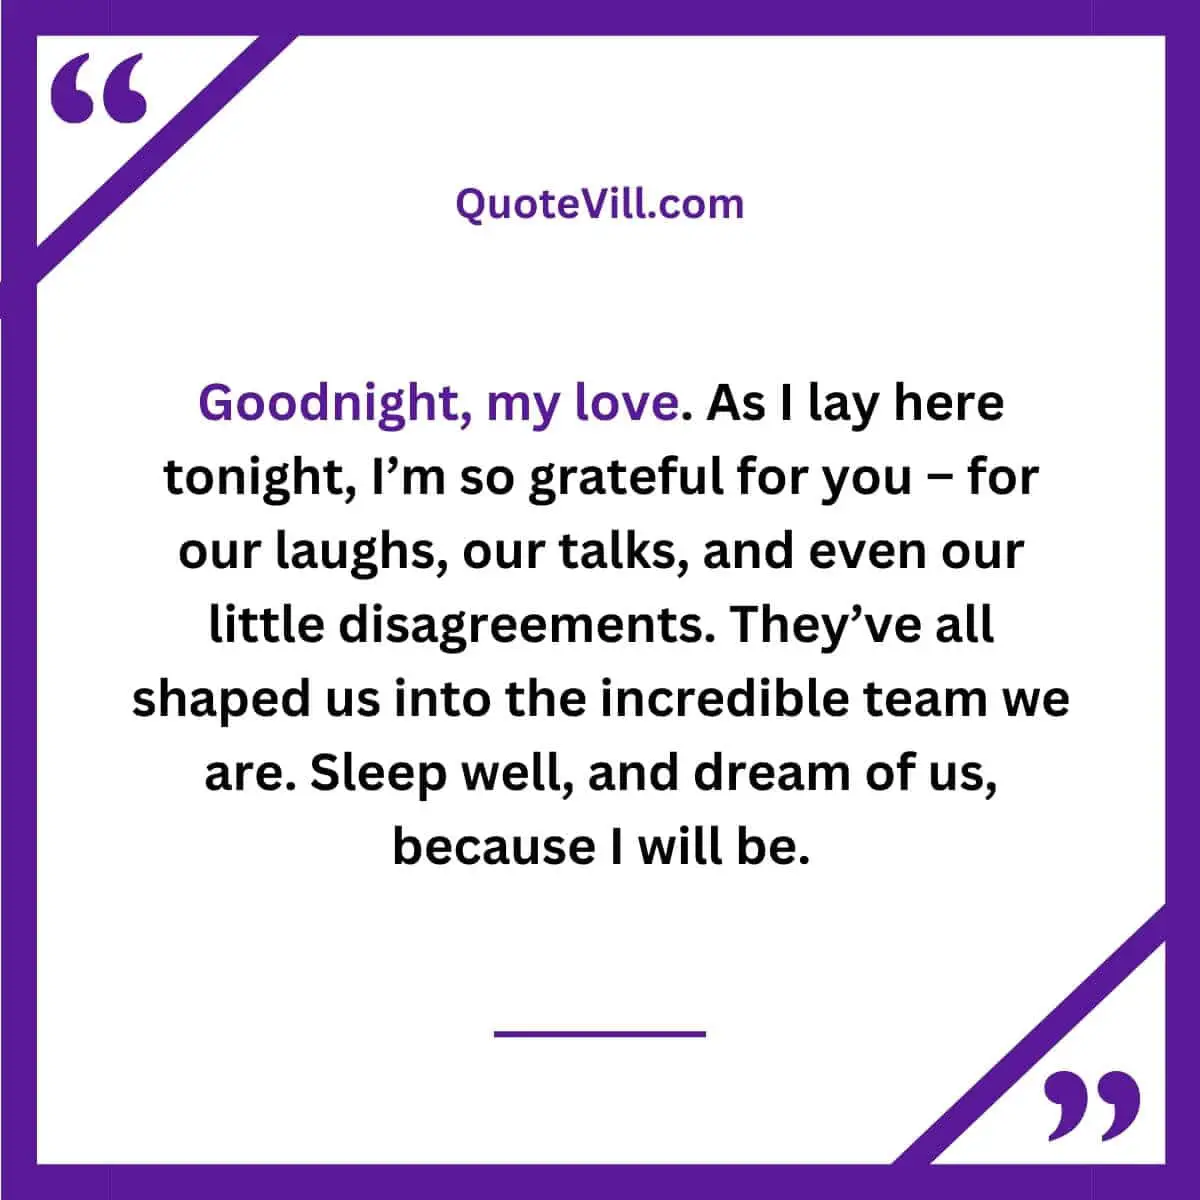 Long Goodnight Paragraphs For A Lasting Relationship